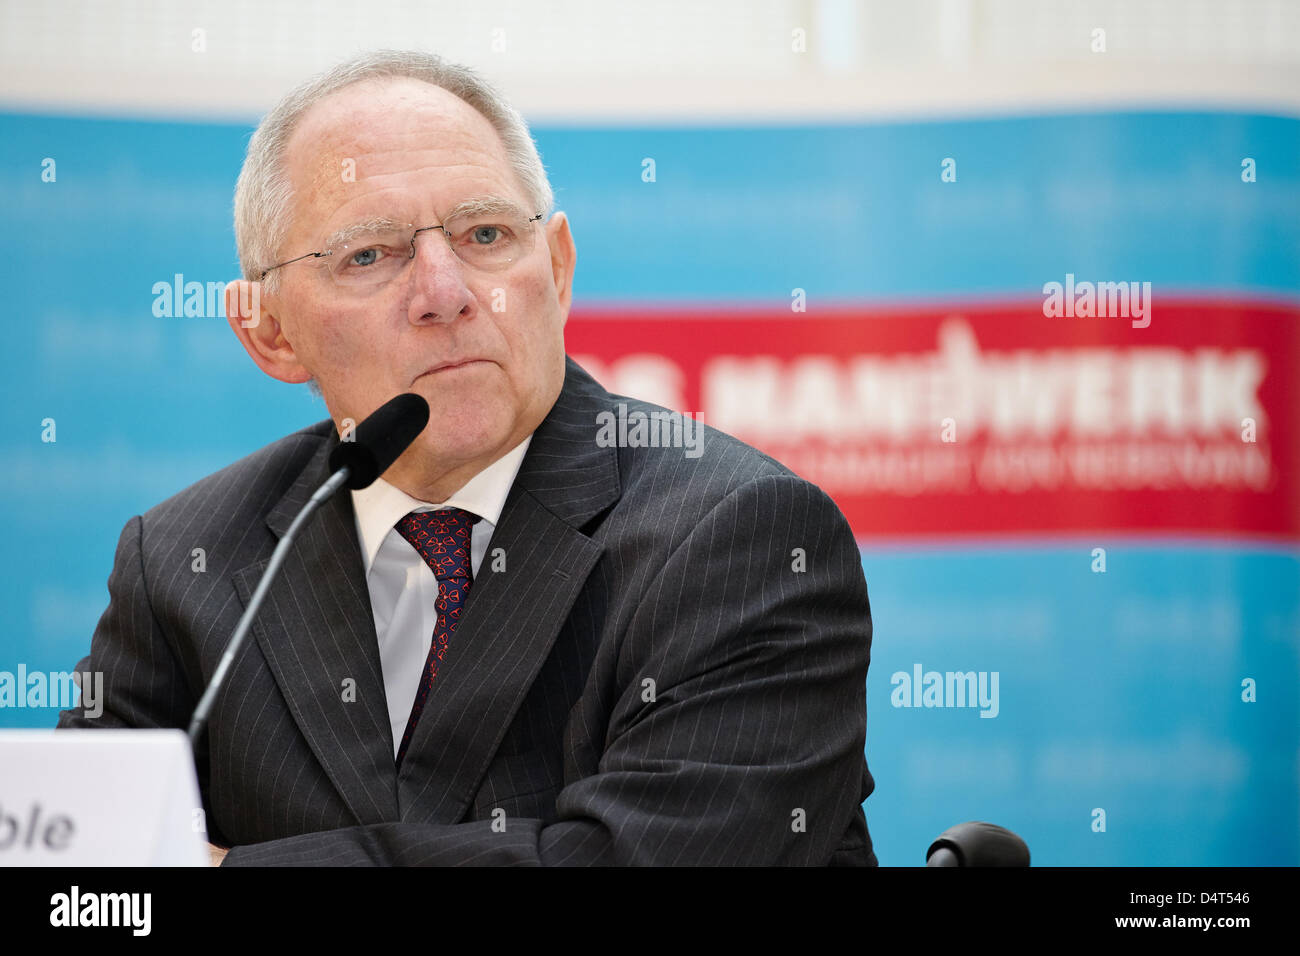 Wolfgang Schaeuble (CDU), Federal Minister of Finance, speaks at the ZDH-Tax Forum 2013 in Berlin./ Berlin, 18 March 2013. Representatives of the Federal Government, the German Parliament, the European Commission and the courts discuss the challenges of fiscal policy in Europe and the focus of tax policy in the 18th Discuss legislative session at The German Confederation of Skilled Crafts ZDH-Tax Forum 2013 on 'More Europe in the tax and fiscal policy?' The speakers are Wolfgang Schaeuble, Federal Minister of Finance, Heinz Zourek, Director General for Taxation and Customs Union of the Europea Stock Photo